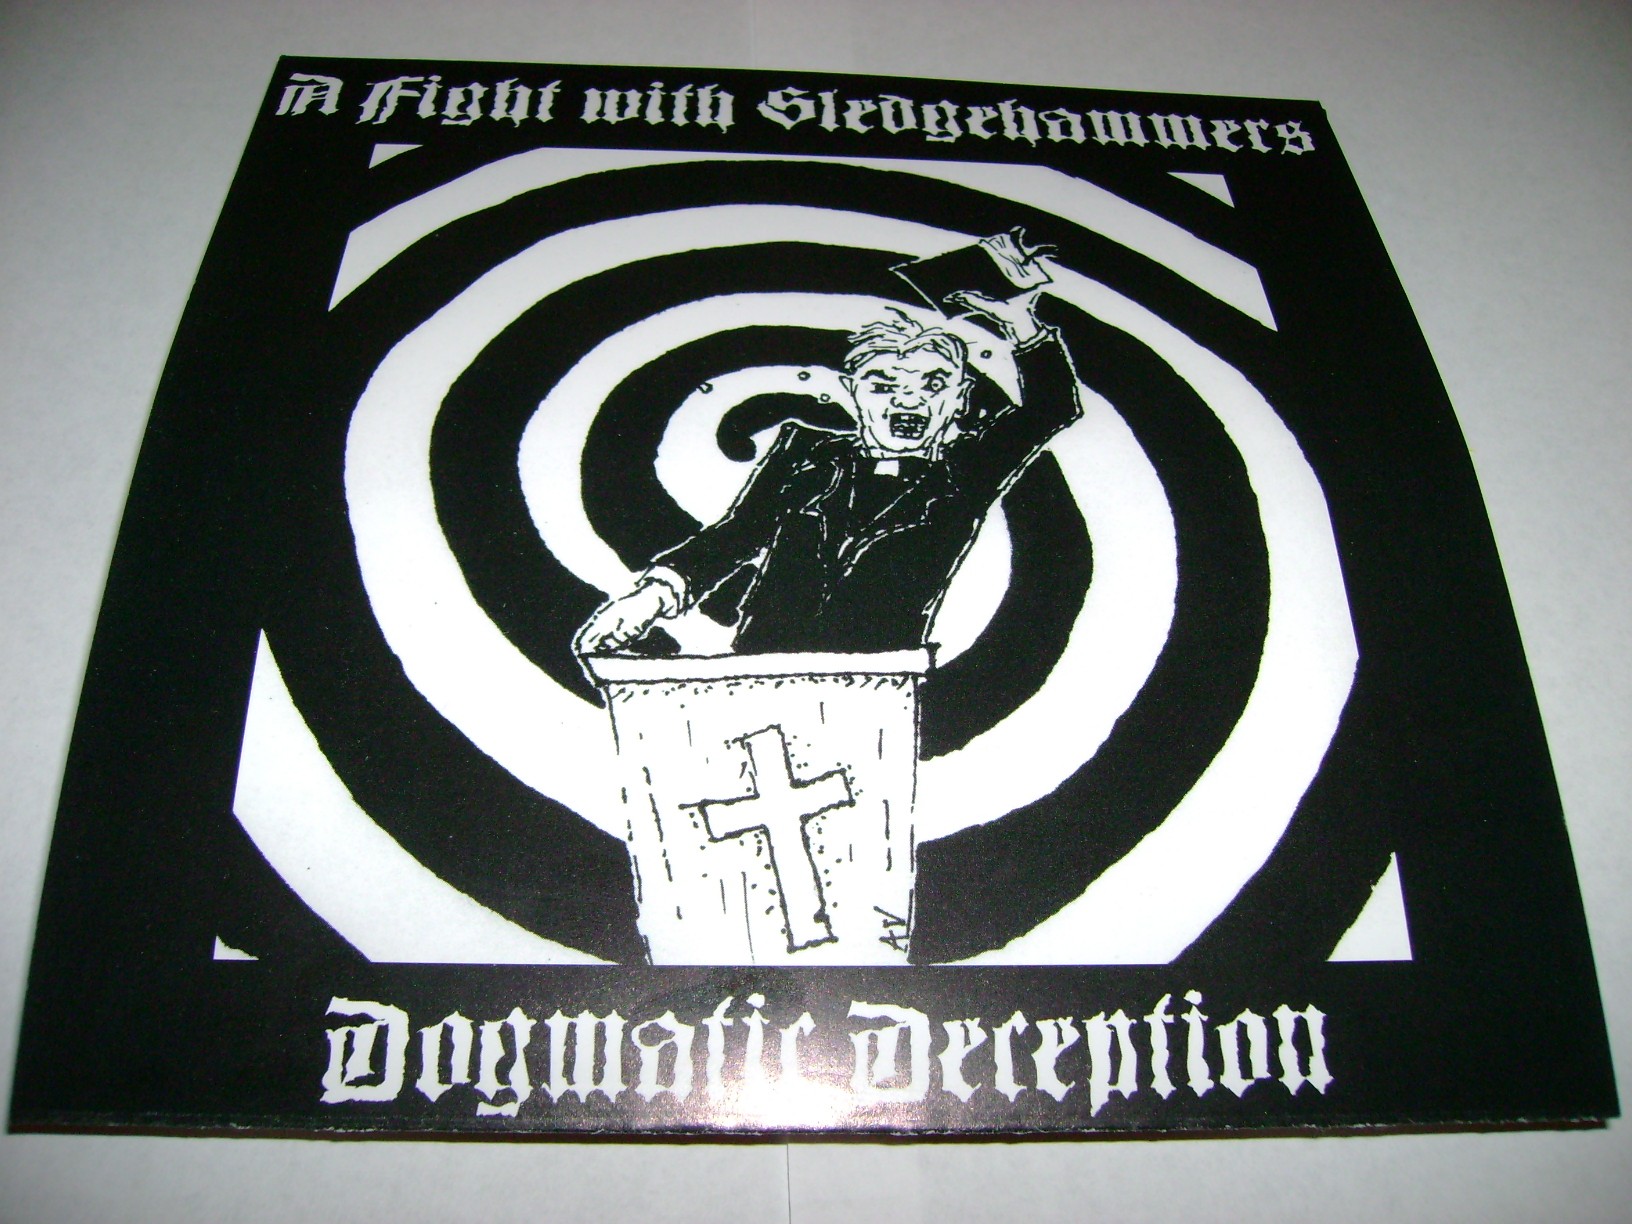 A FIGHT WITH SLEDGEHAMMERS - Dogmatic Deception 7"